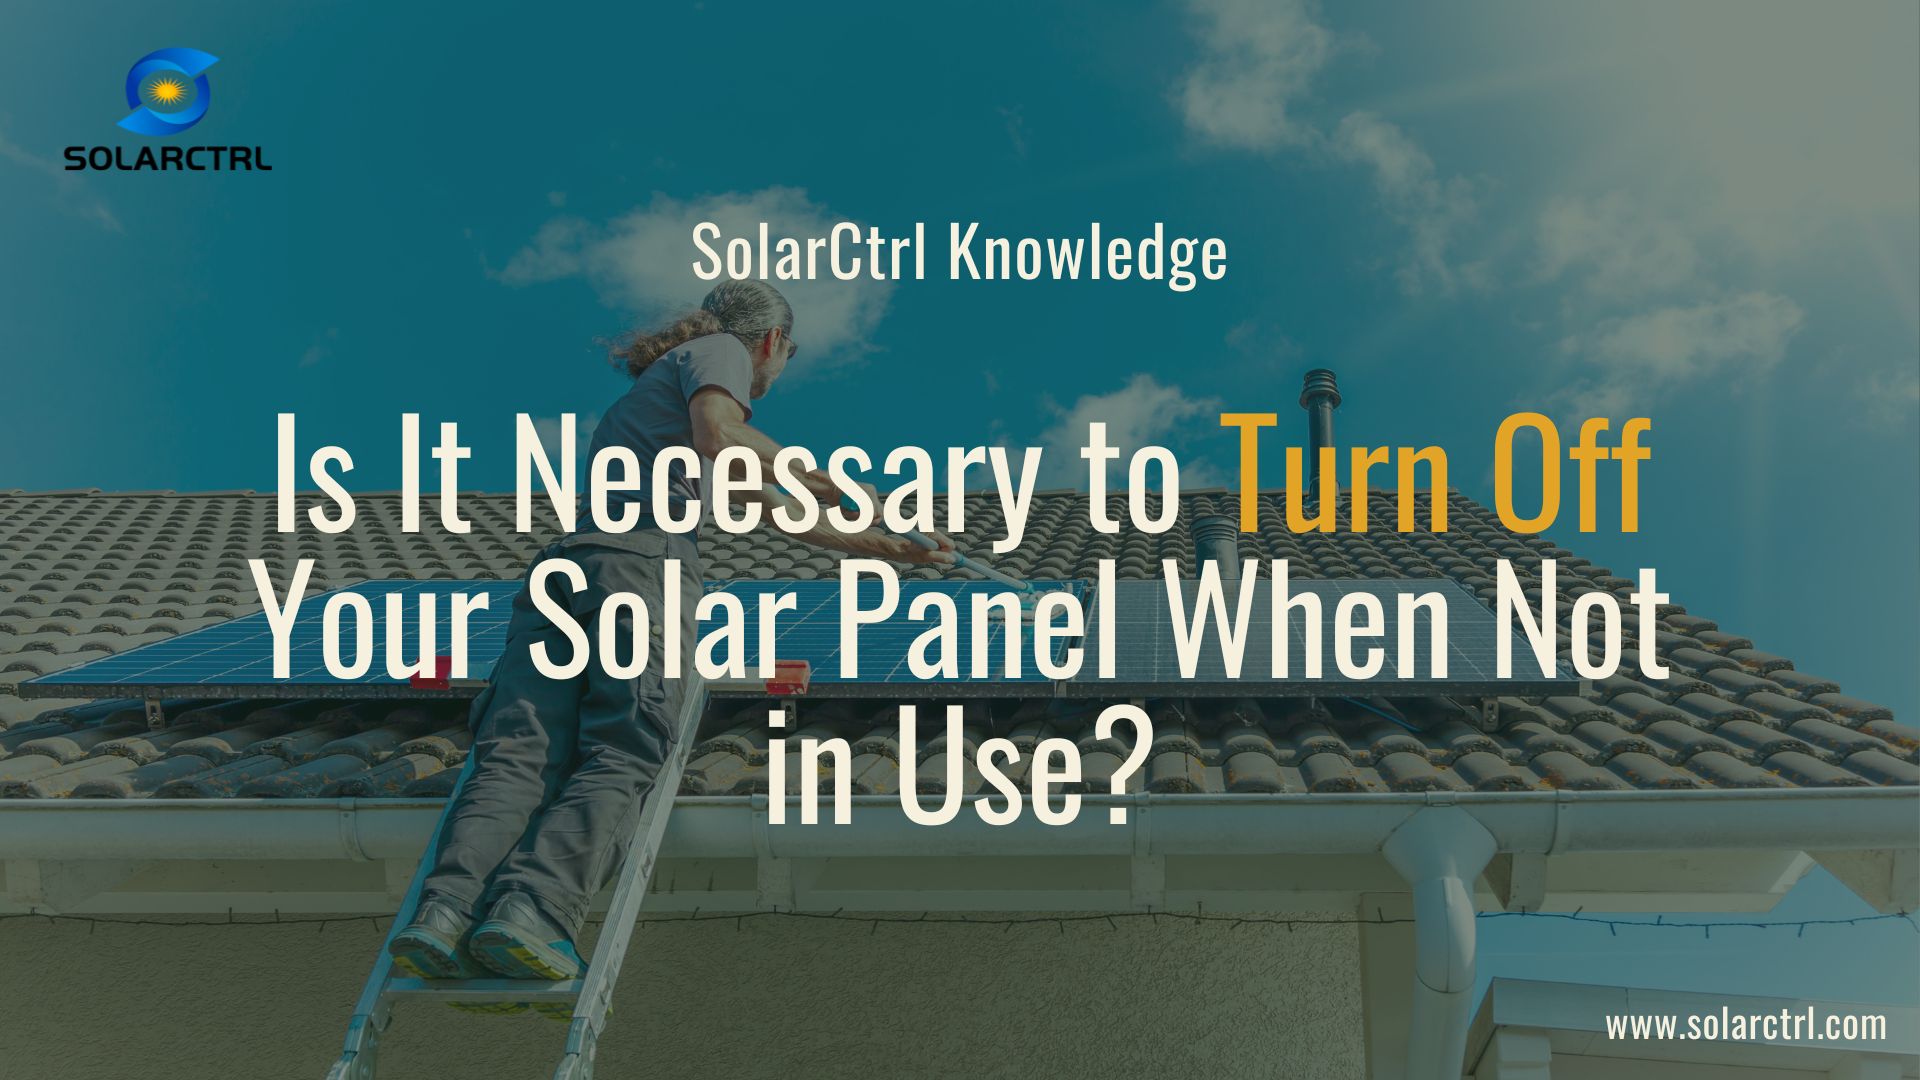 is it necessary to turn off your solar panel when not in use